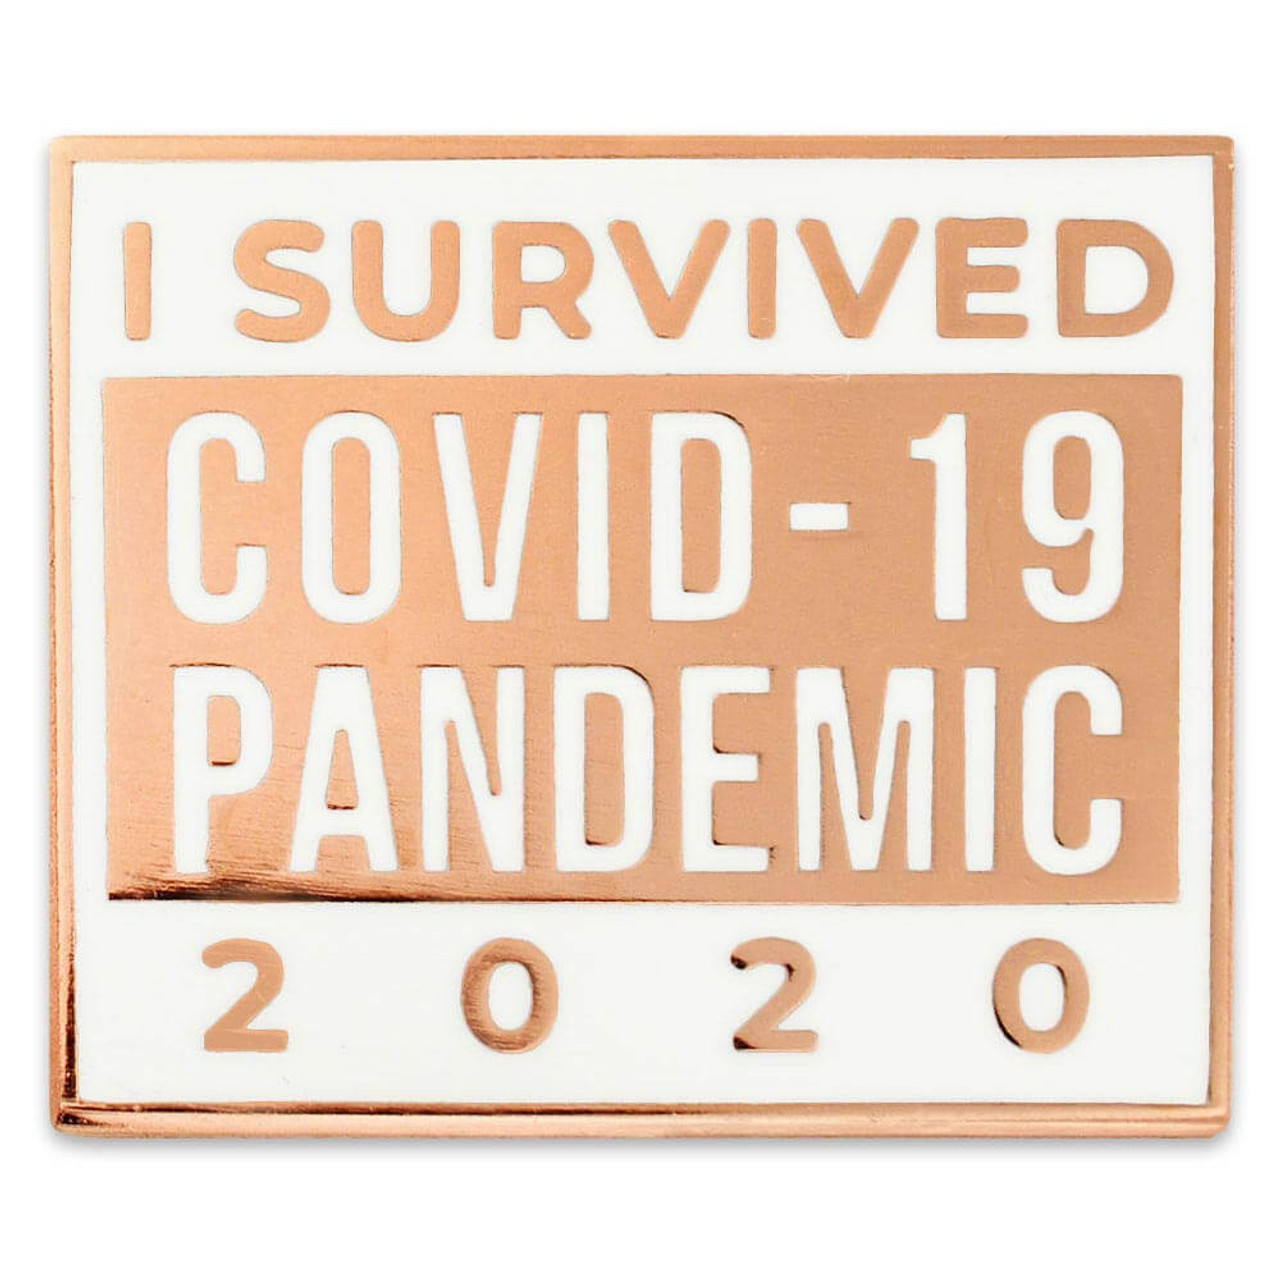 I Survived 2020 Wood Pin